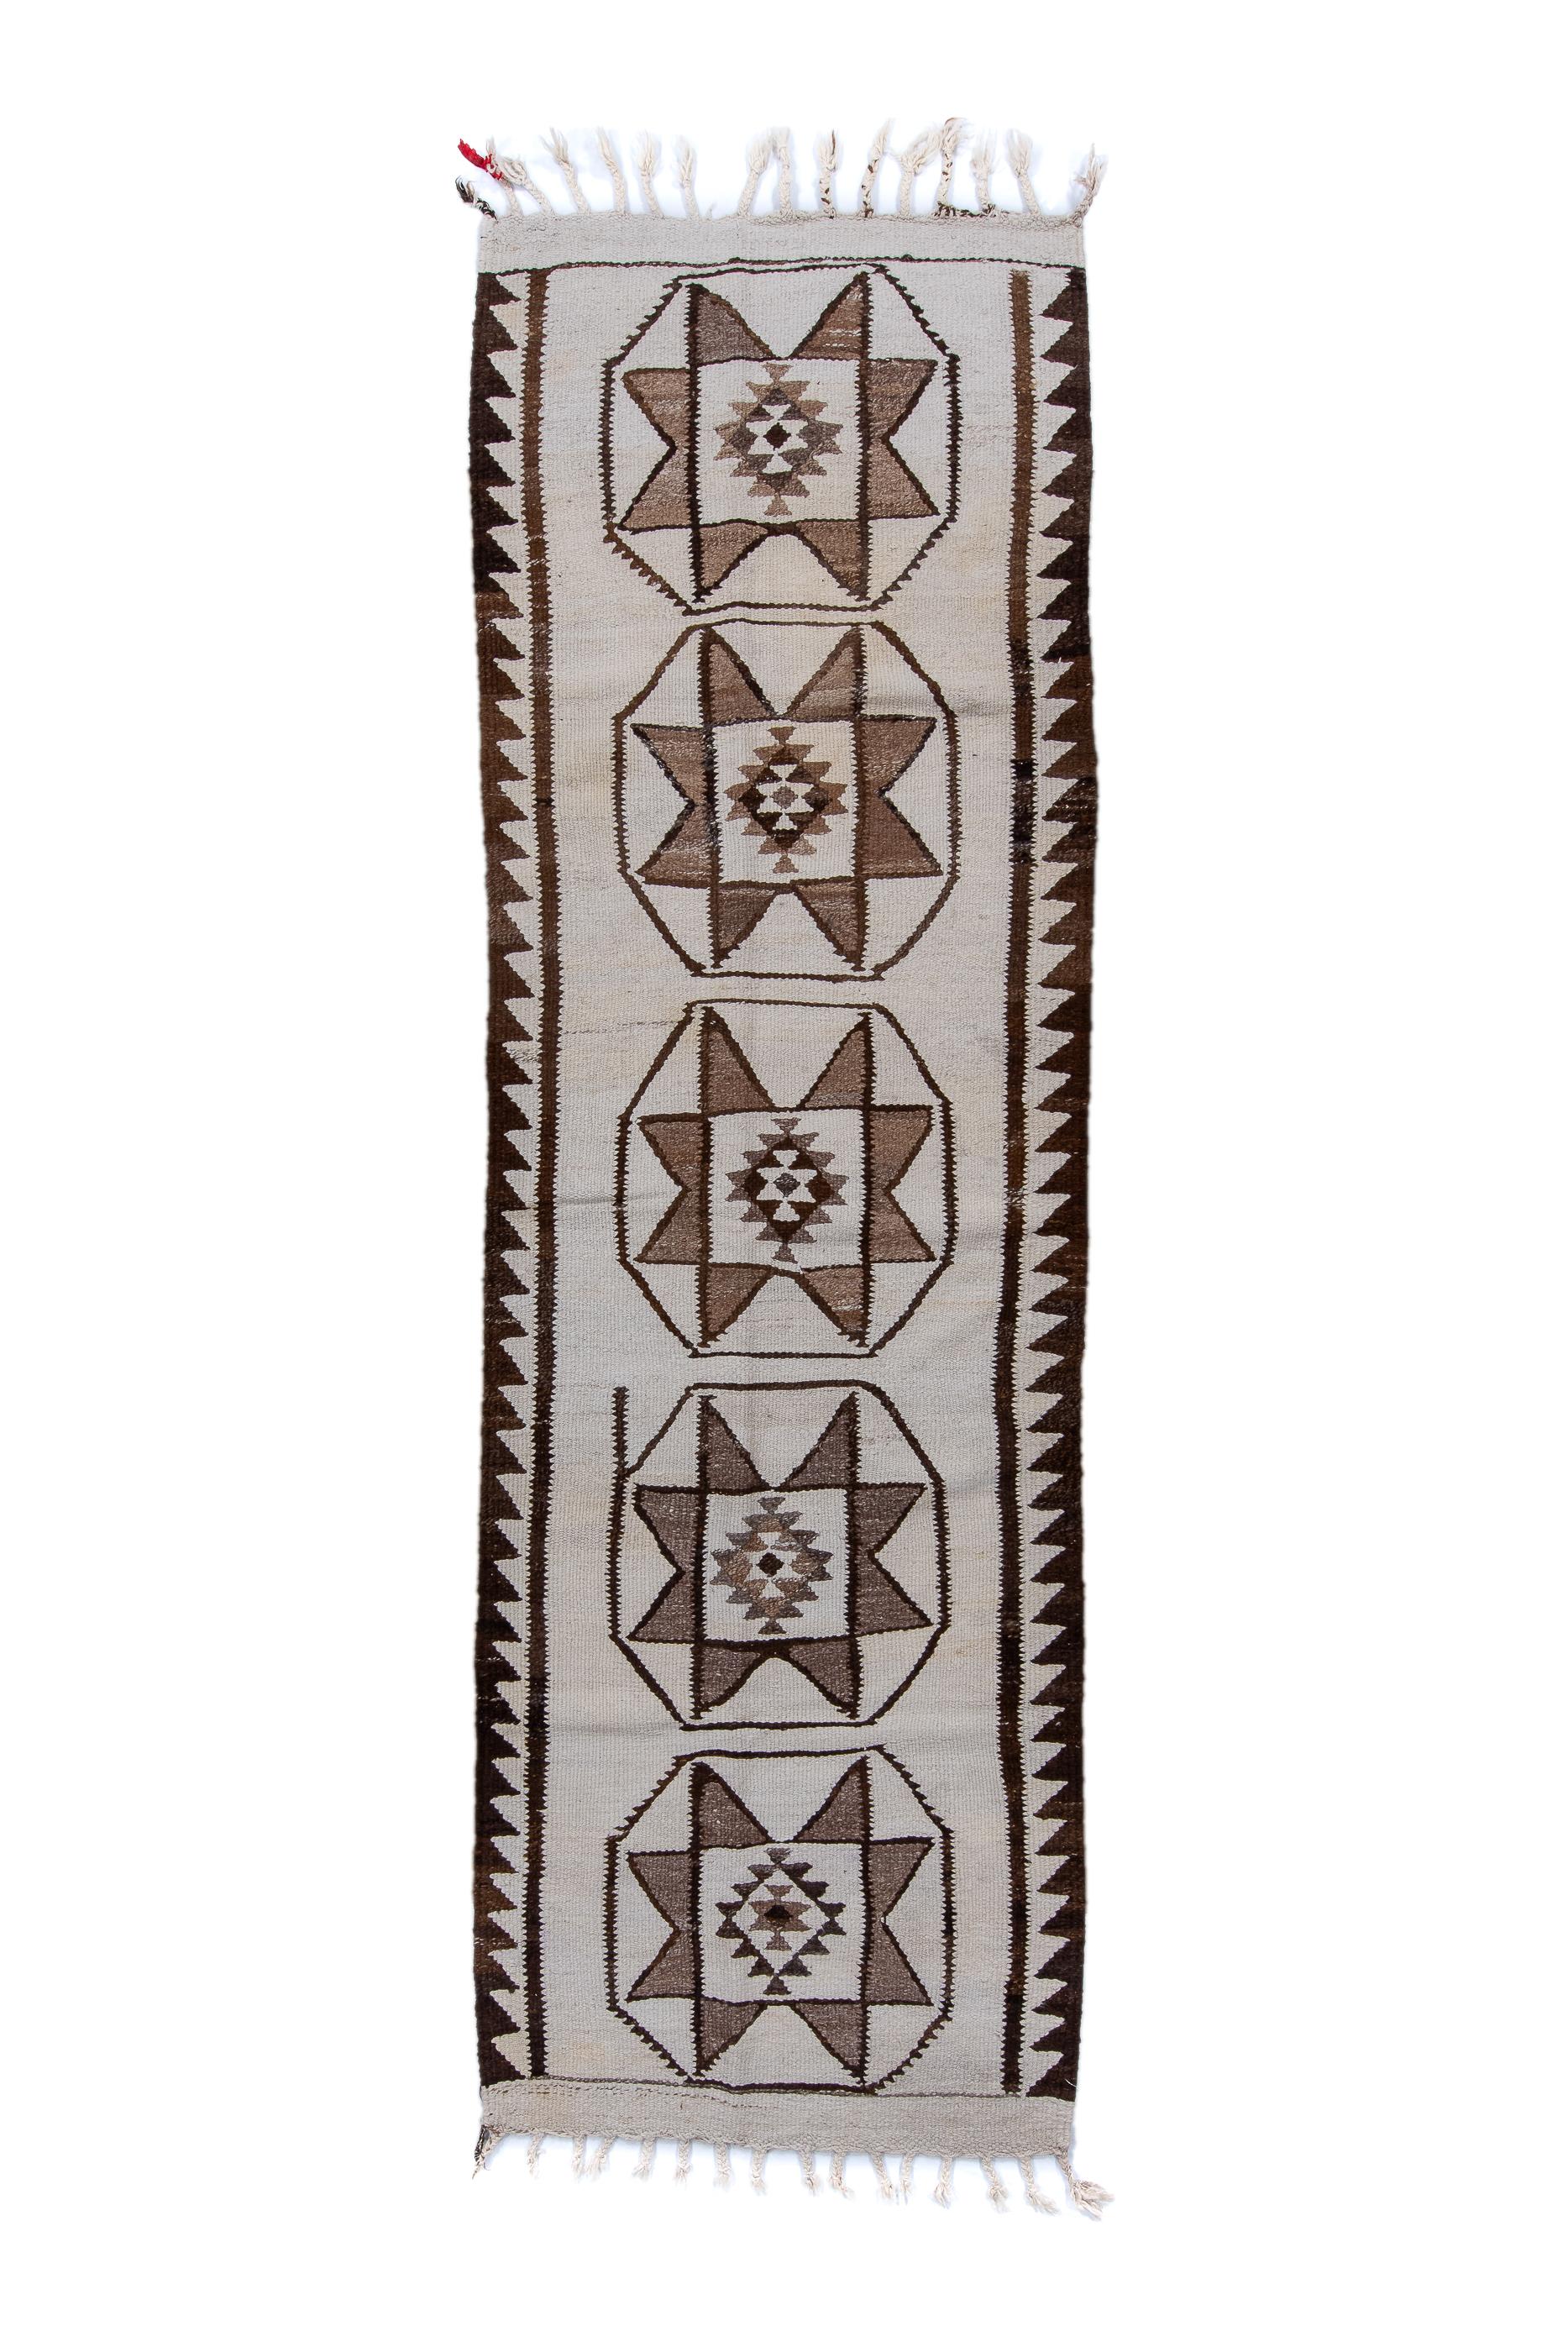 The cream field displays five floating octagons enclosing each an eight pointed star, with details in red and  brown. Sawtooth bitonal side borders. No end borders but cream flatweave finishes with tassels. Slit tapestry weave with wool pattern